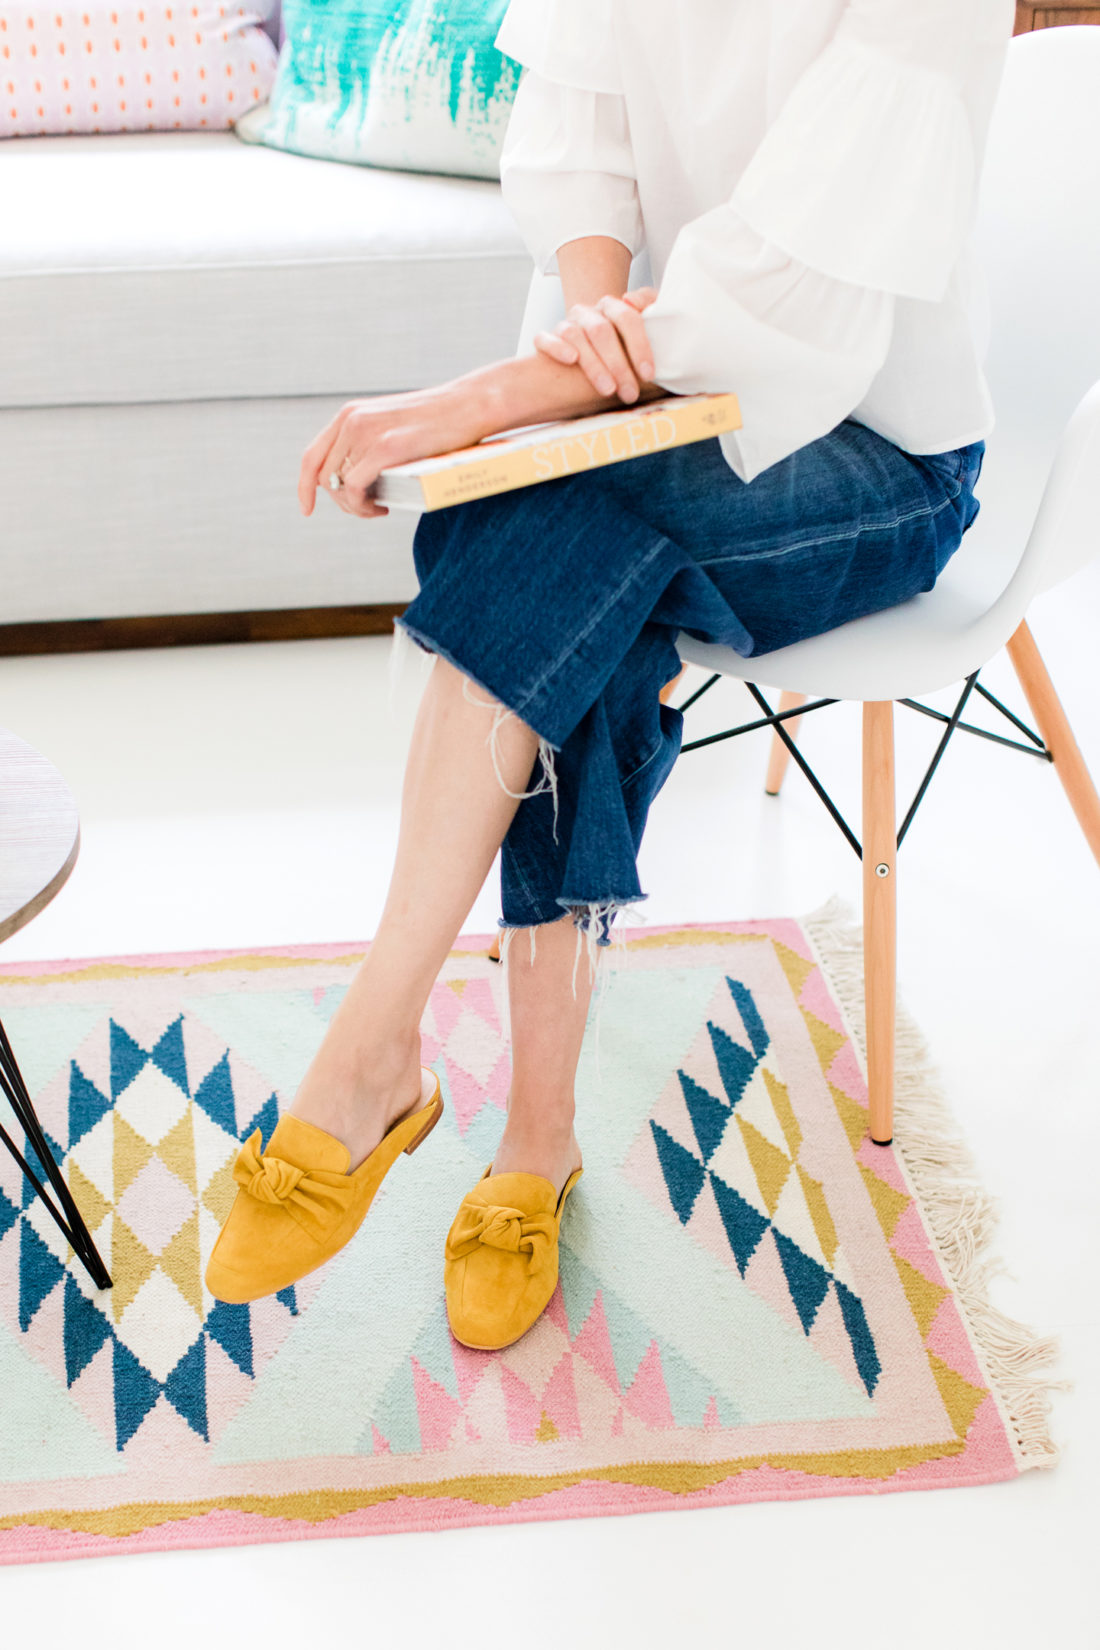 Eva Amurri Martino relaxes in her home office reading a book, wearing a white tiered top, frayed cropped denim, and mustard mules